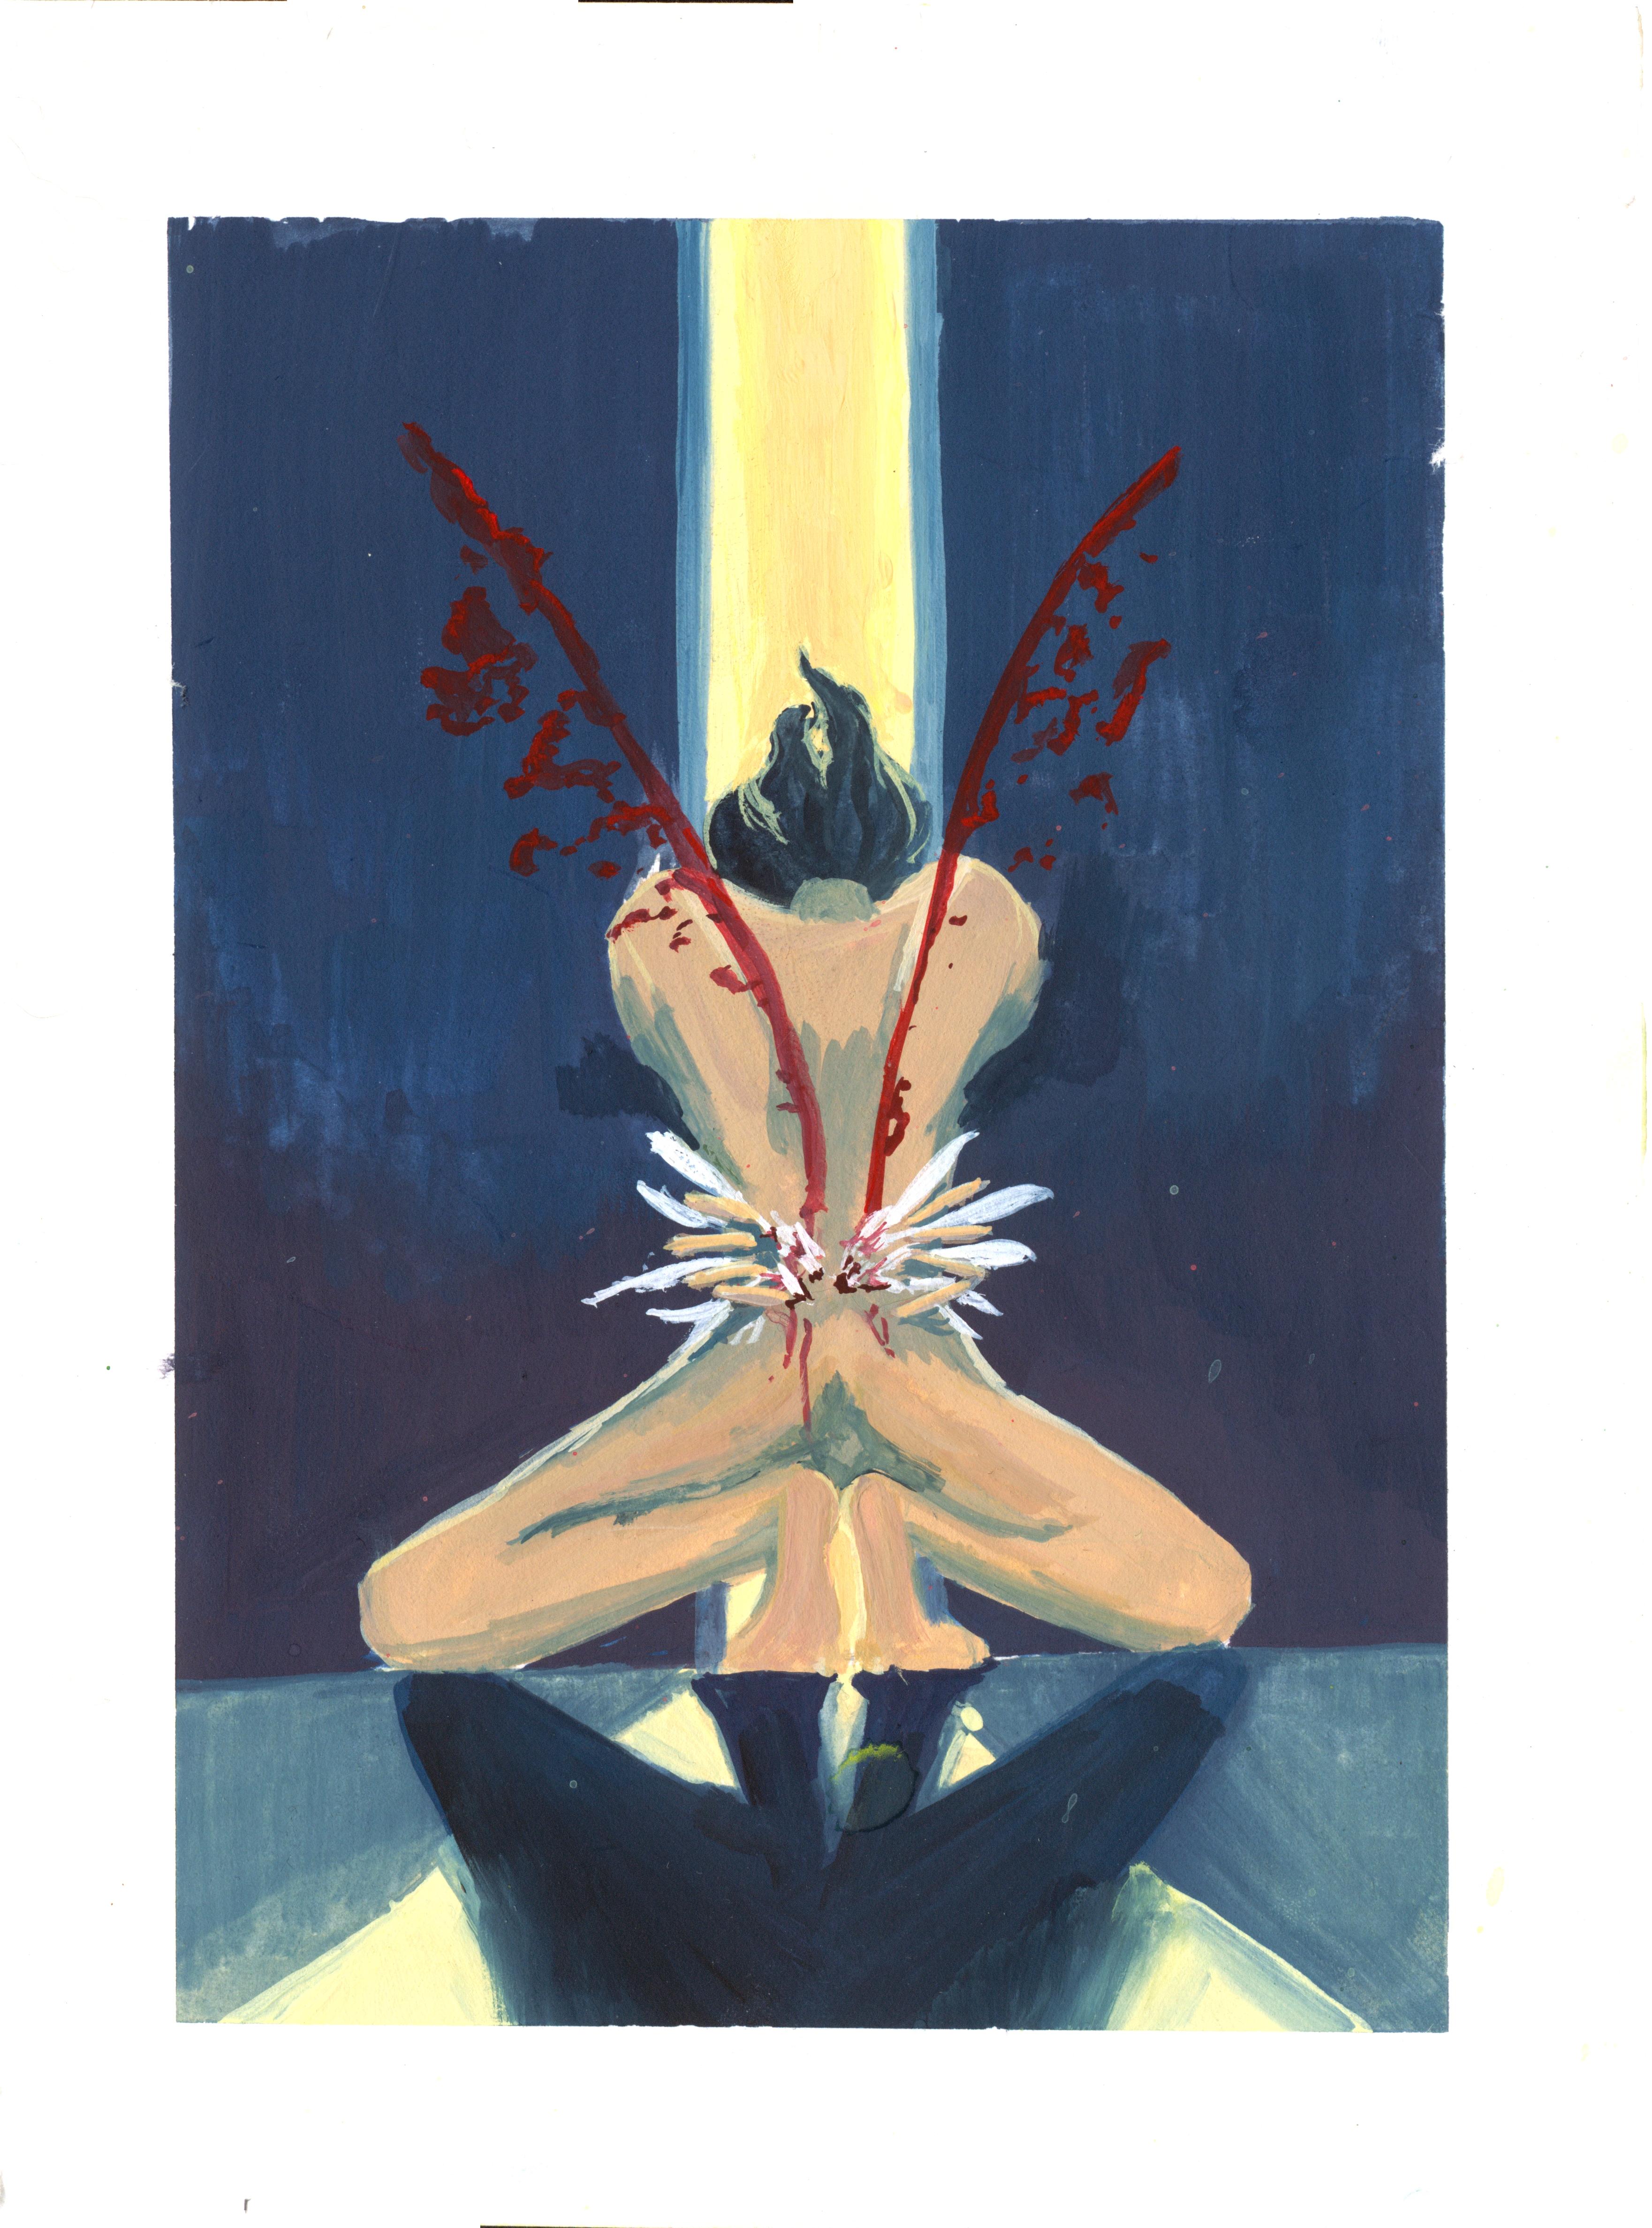 A person kneels before an opening door. They're clutching the small of
their back, where white feathers are bursting from between their fingers. Spouts
of blood arc violently upward, in the shape of wings.